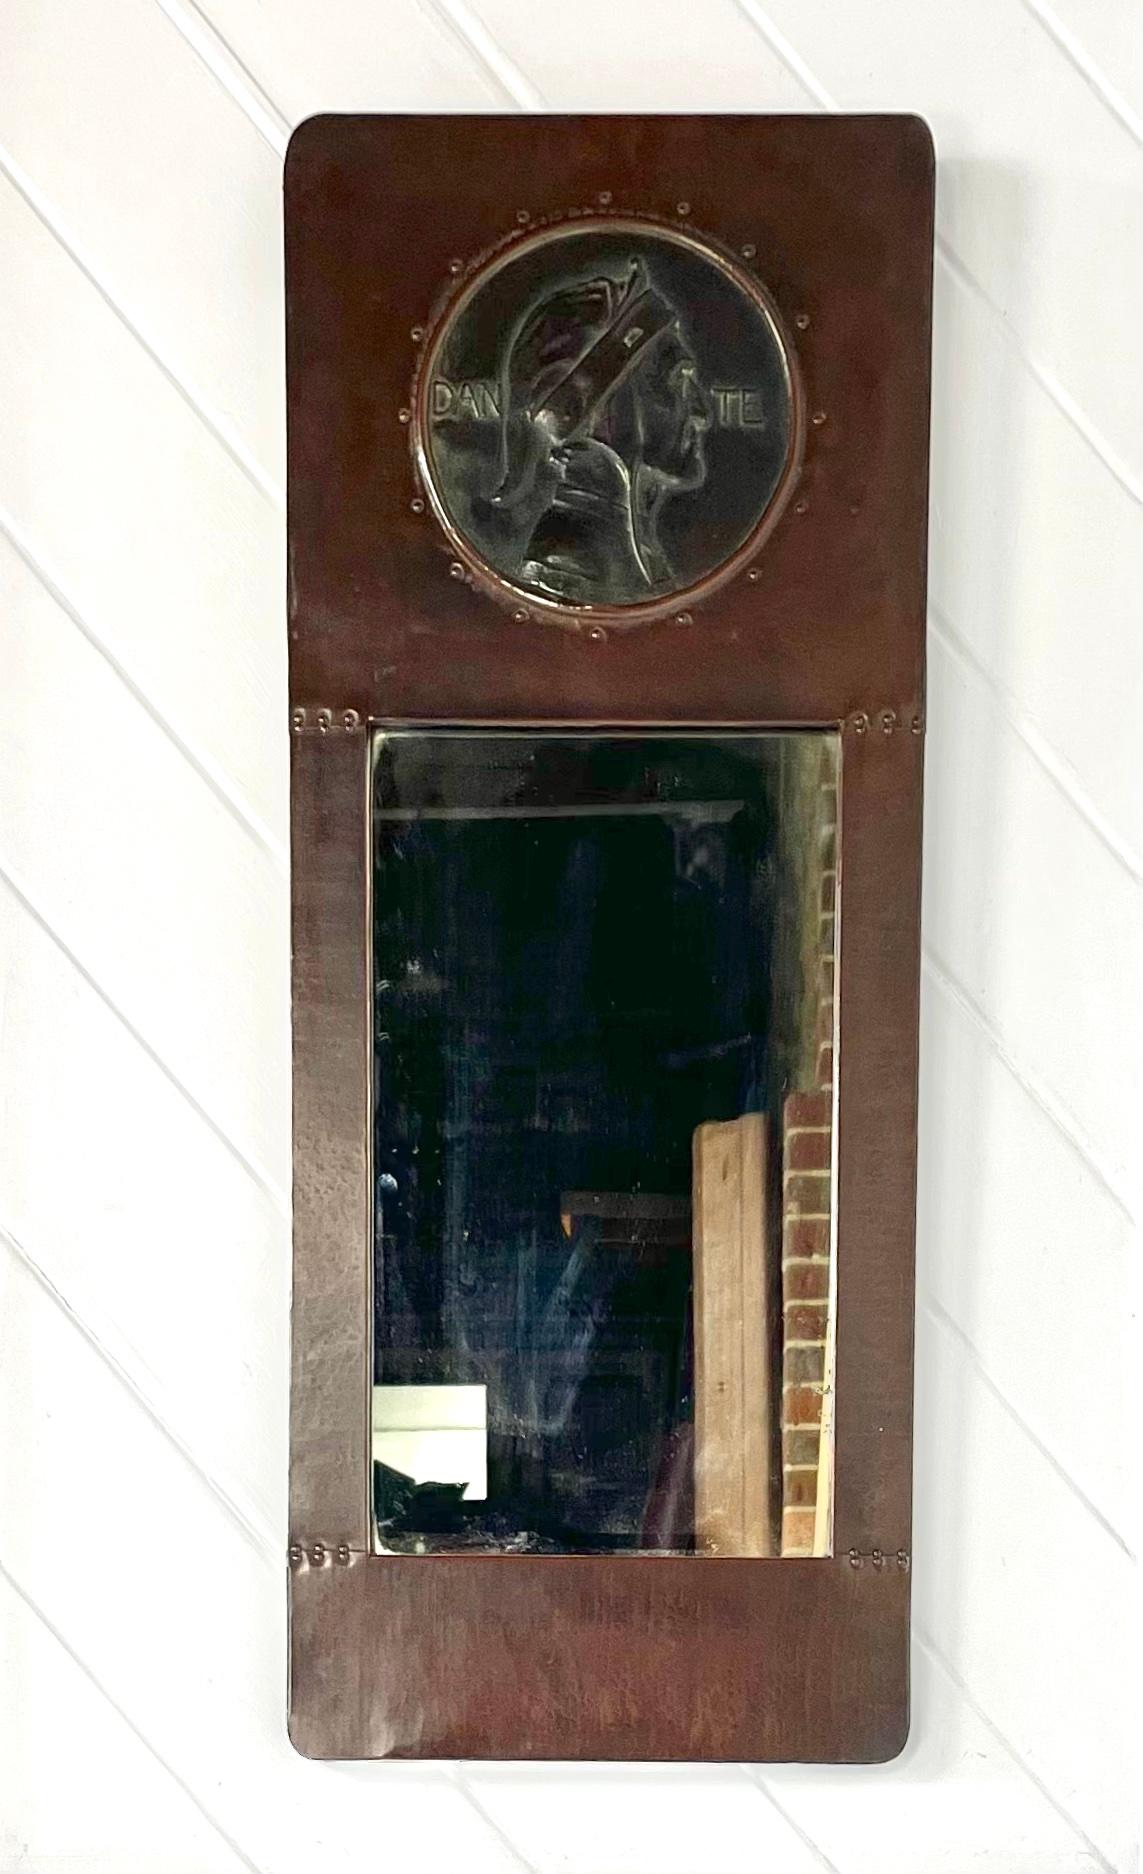 Arts & Crafts copper framed mirror
with an inset cast bronze roundel depicting 